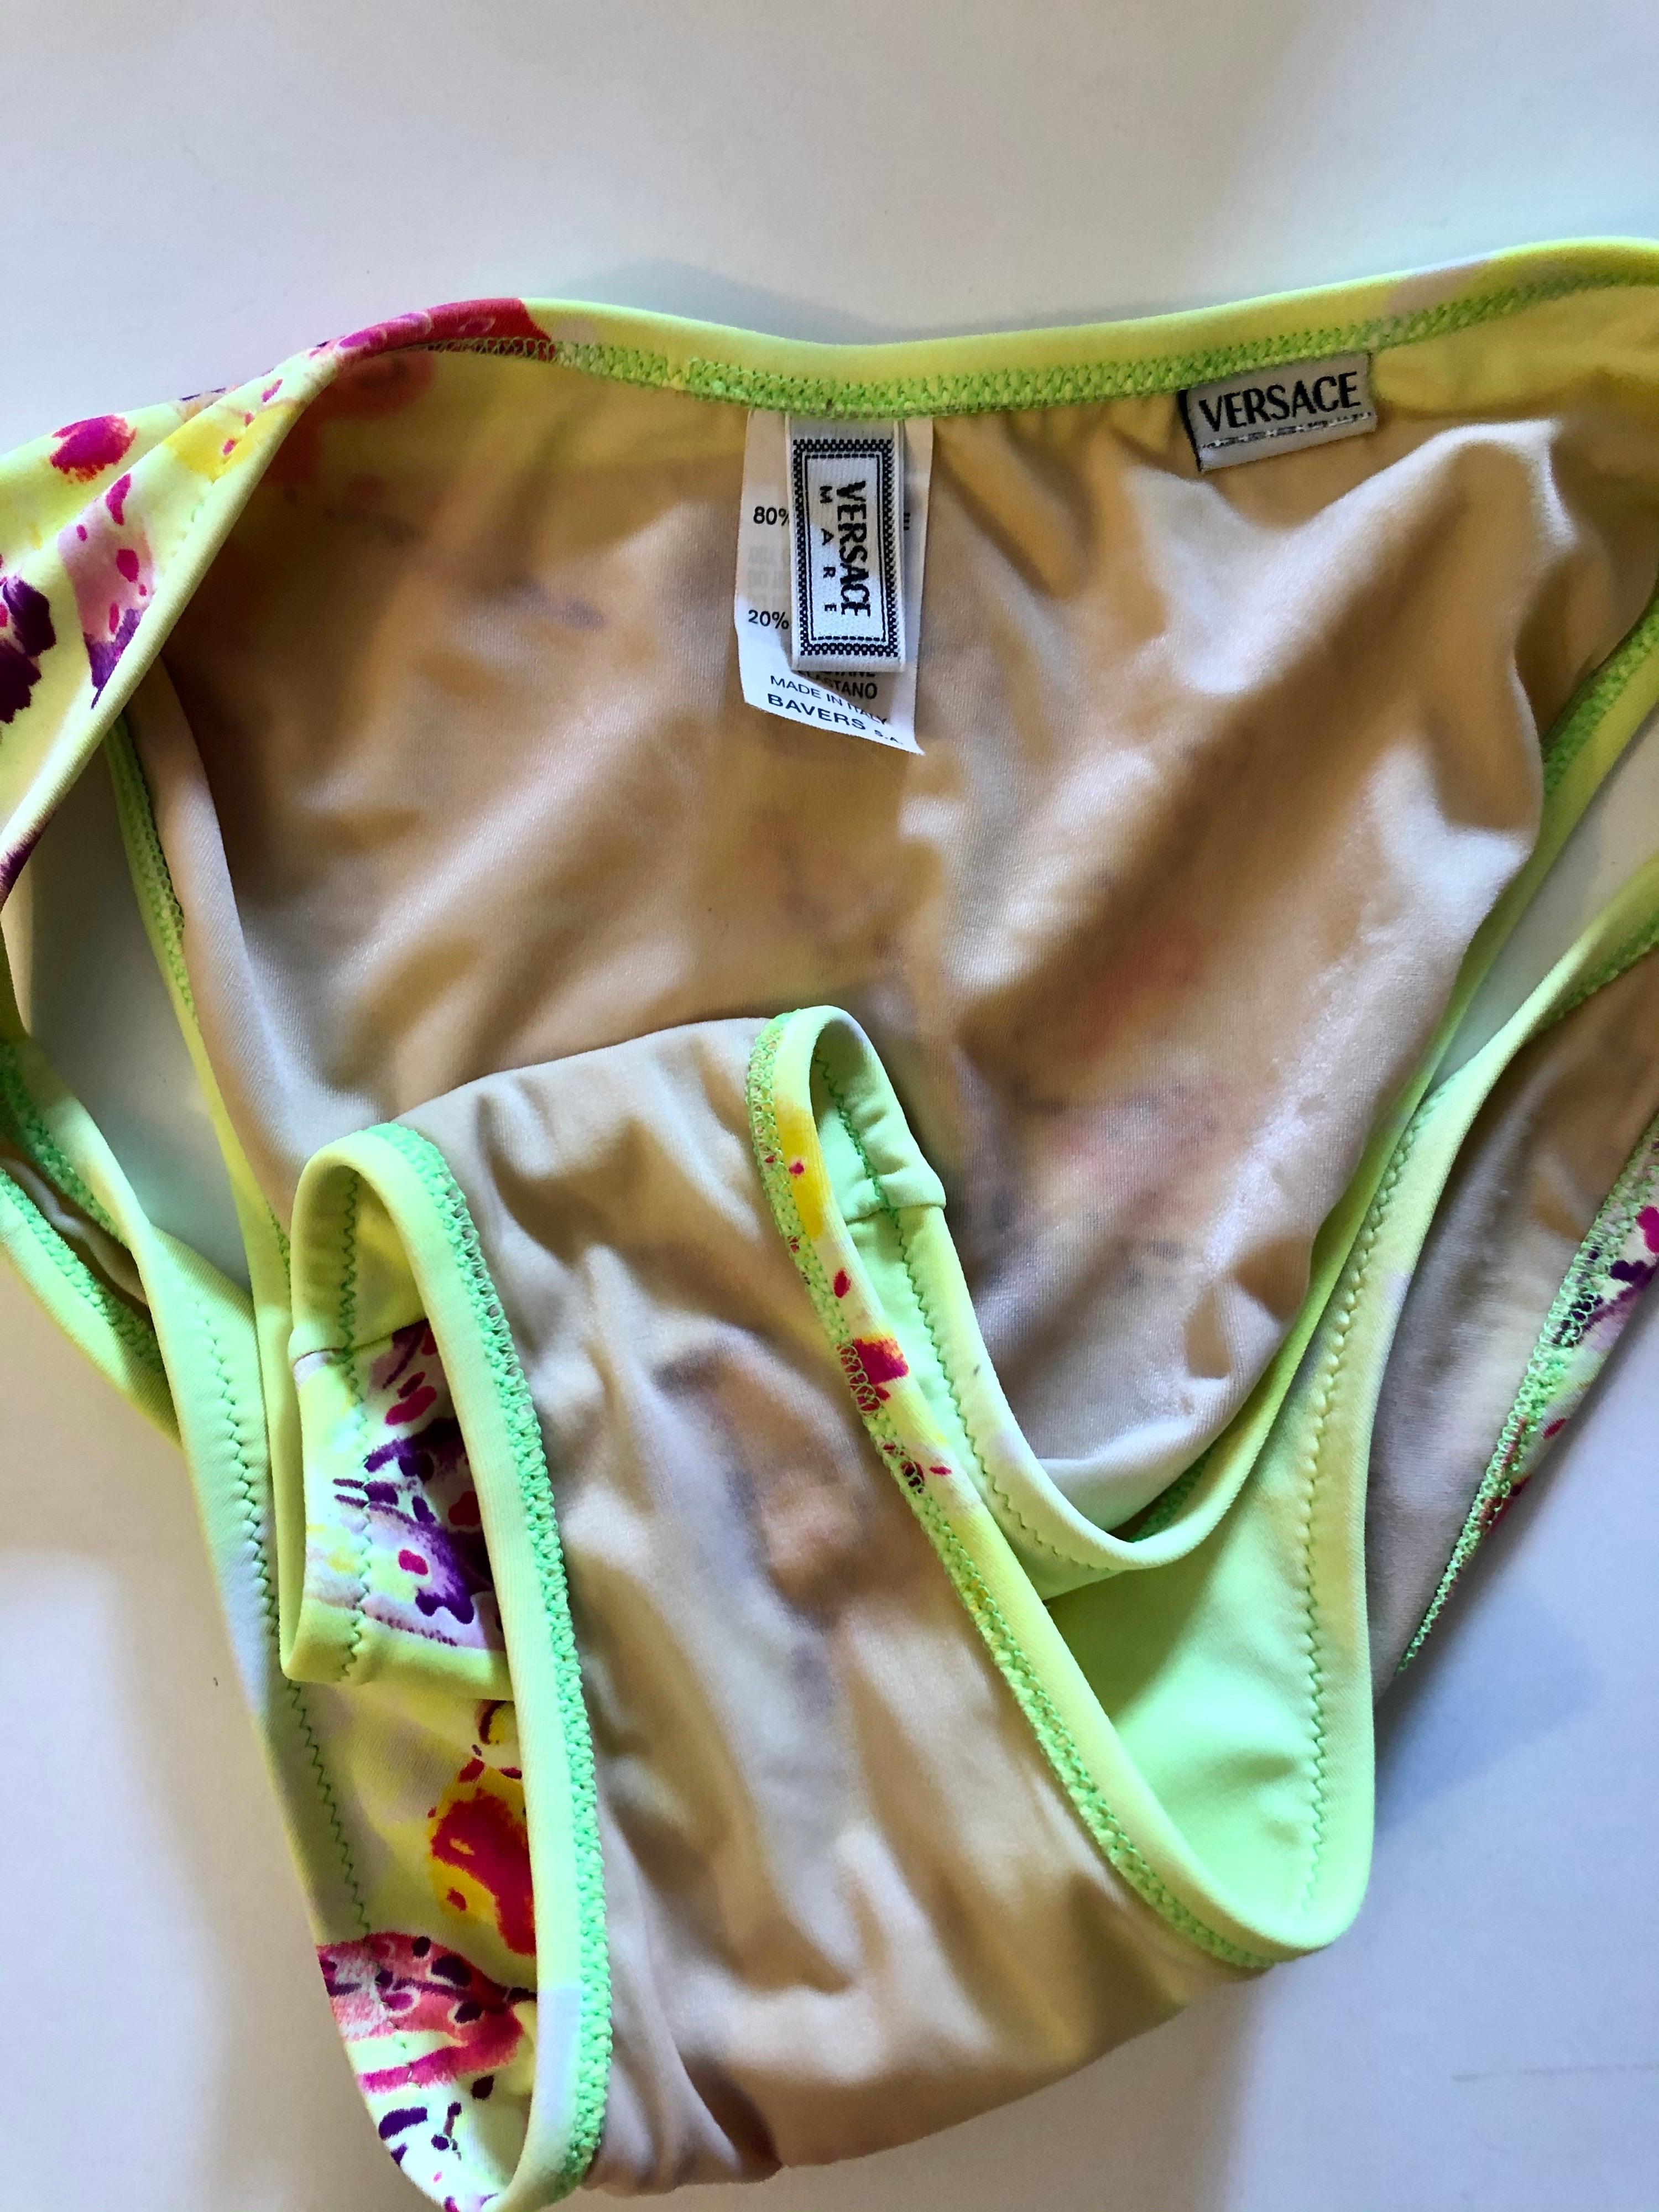 Gianni Versace S/S 2000 Orchid Neon Two-Piece Bikini Set Swimsuit Swimwear  In Good Condition For Sale In Naples, FL